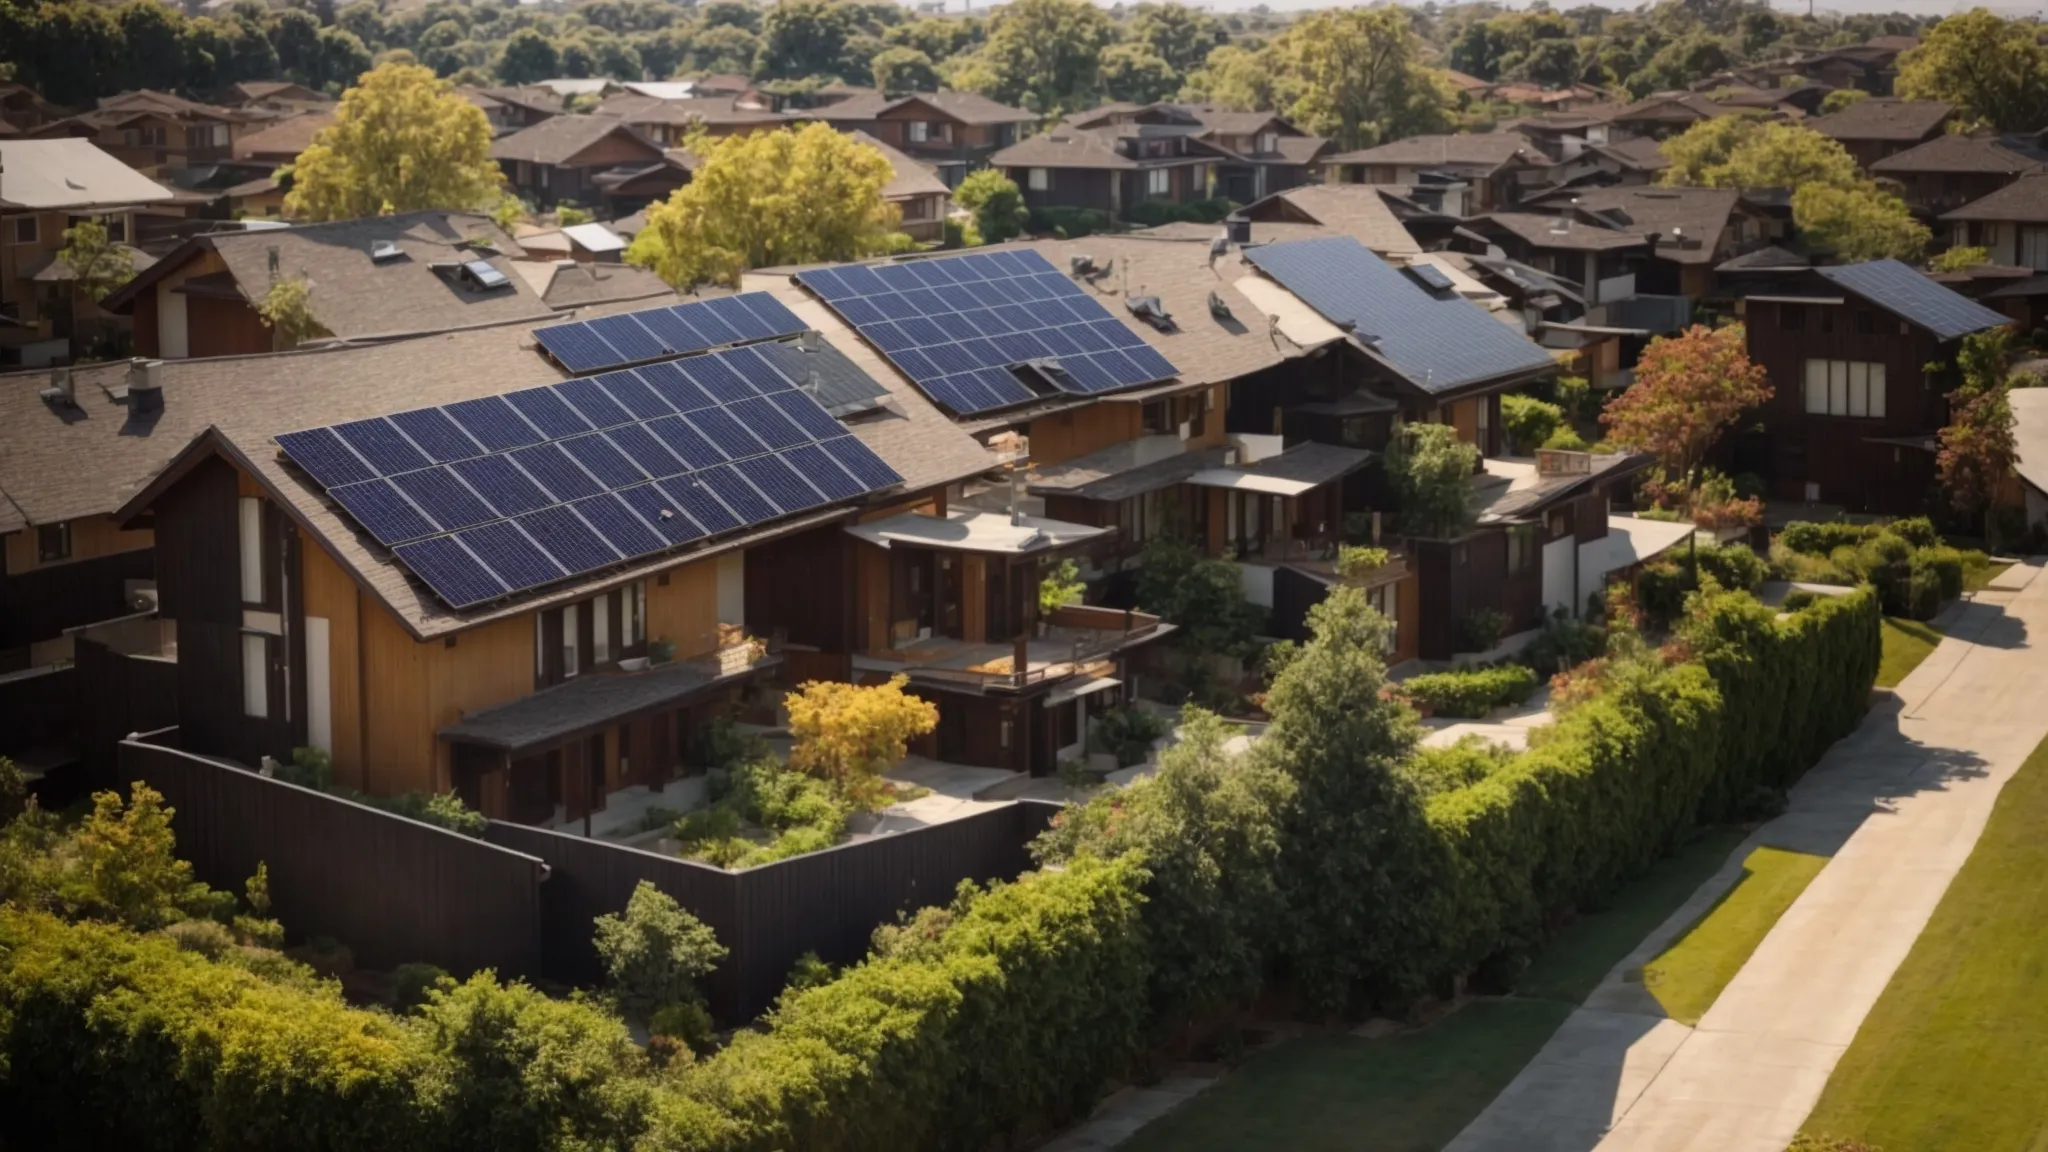 a panoramic view of a neighborhood showing houses with sleek solar panels integrated seamlessly into traditional roofs under a bright sun.